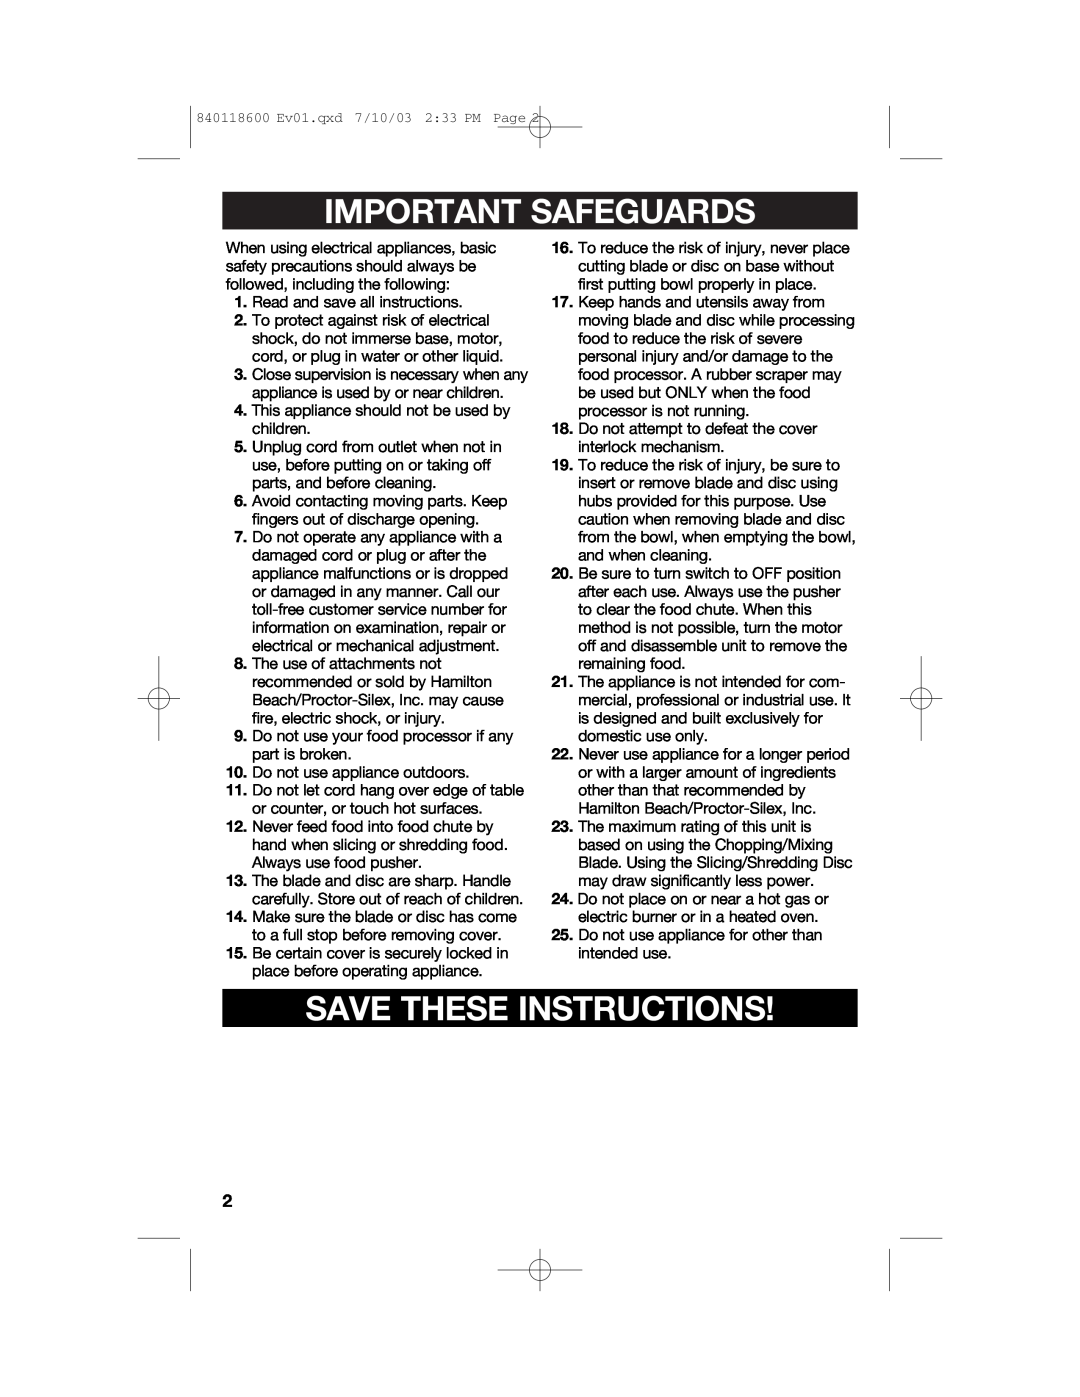 Hamilton Beach 70550RC manual Important Safeguards, Save These Instructions 